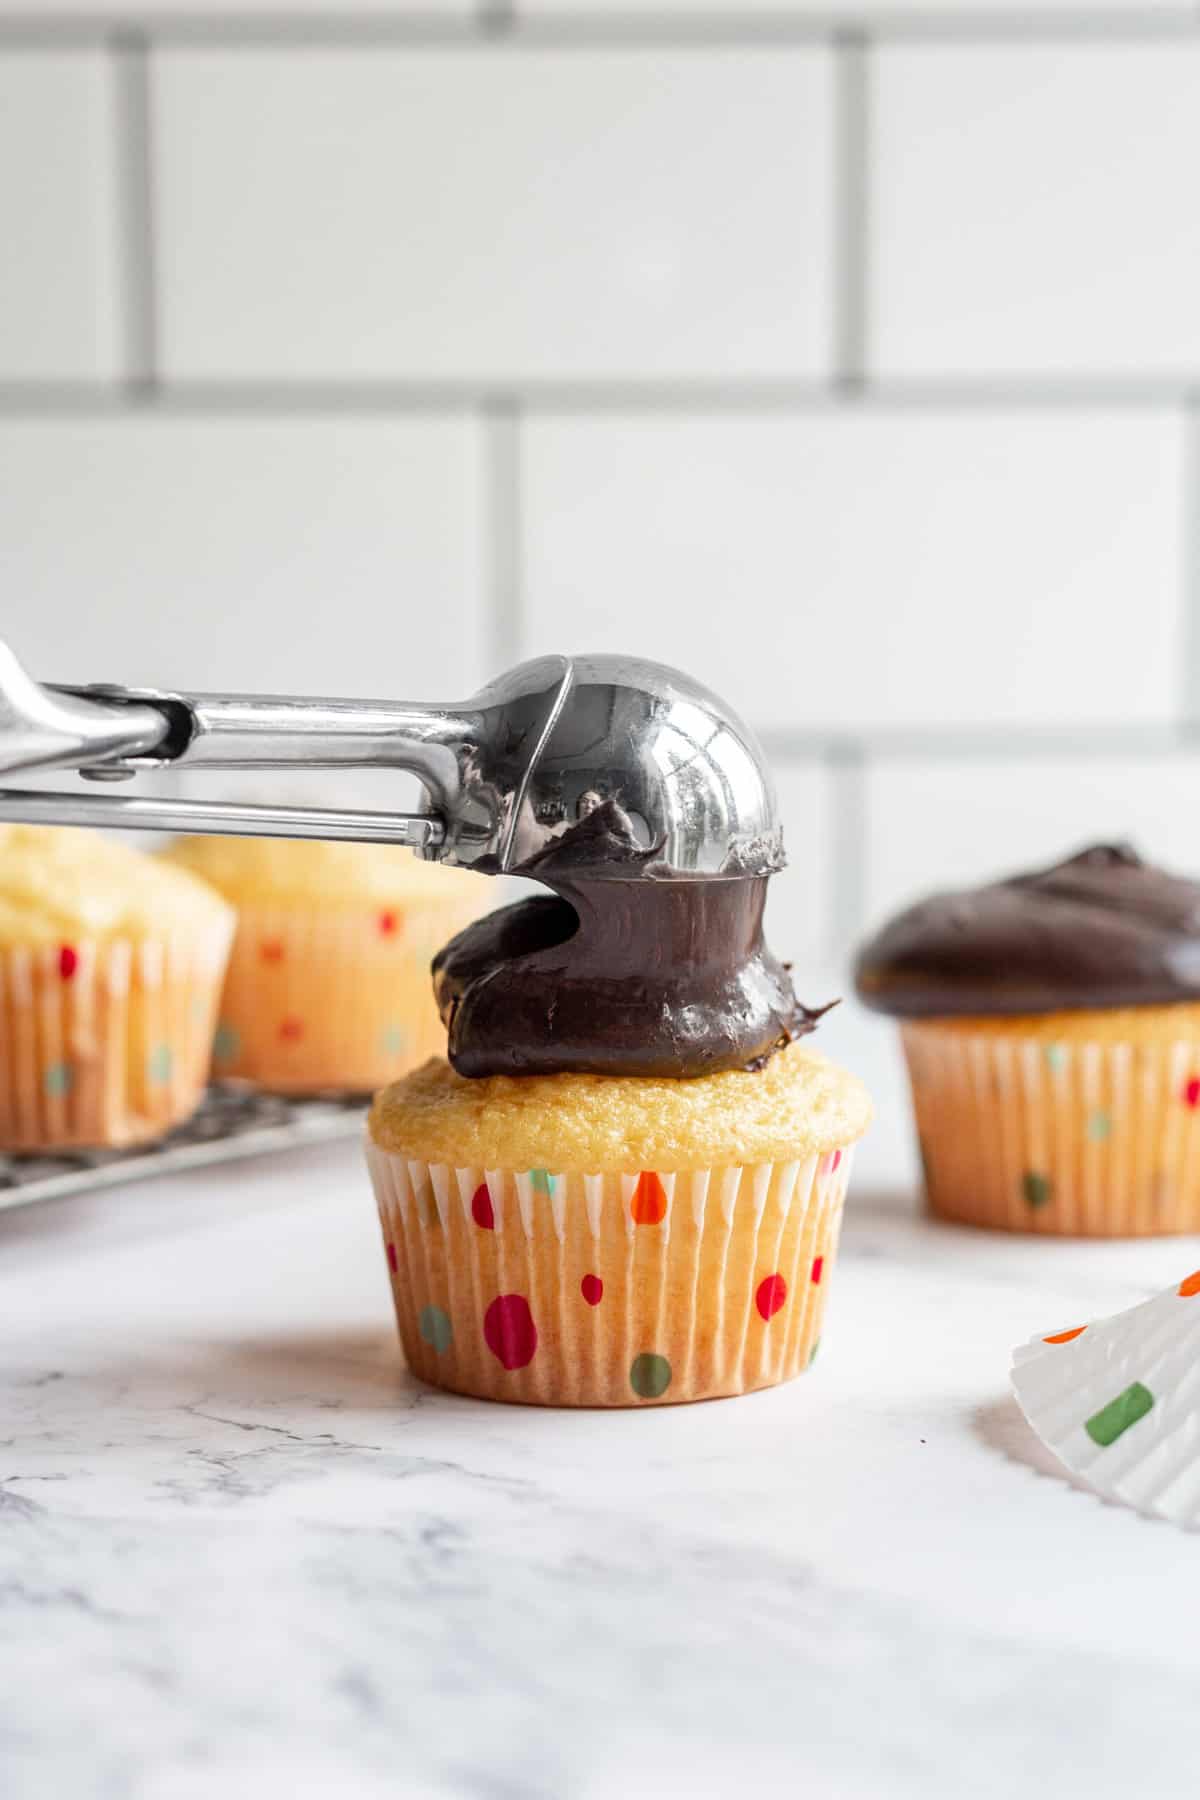 using an ice cream scoop to frost chocolate frosting on a vanilla cupcake